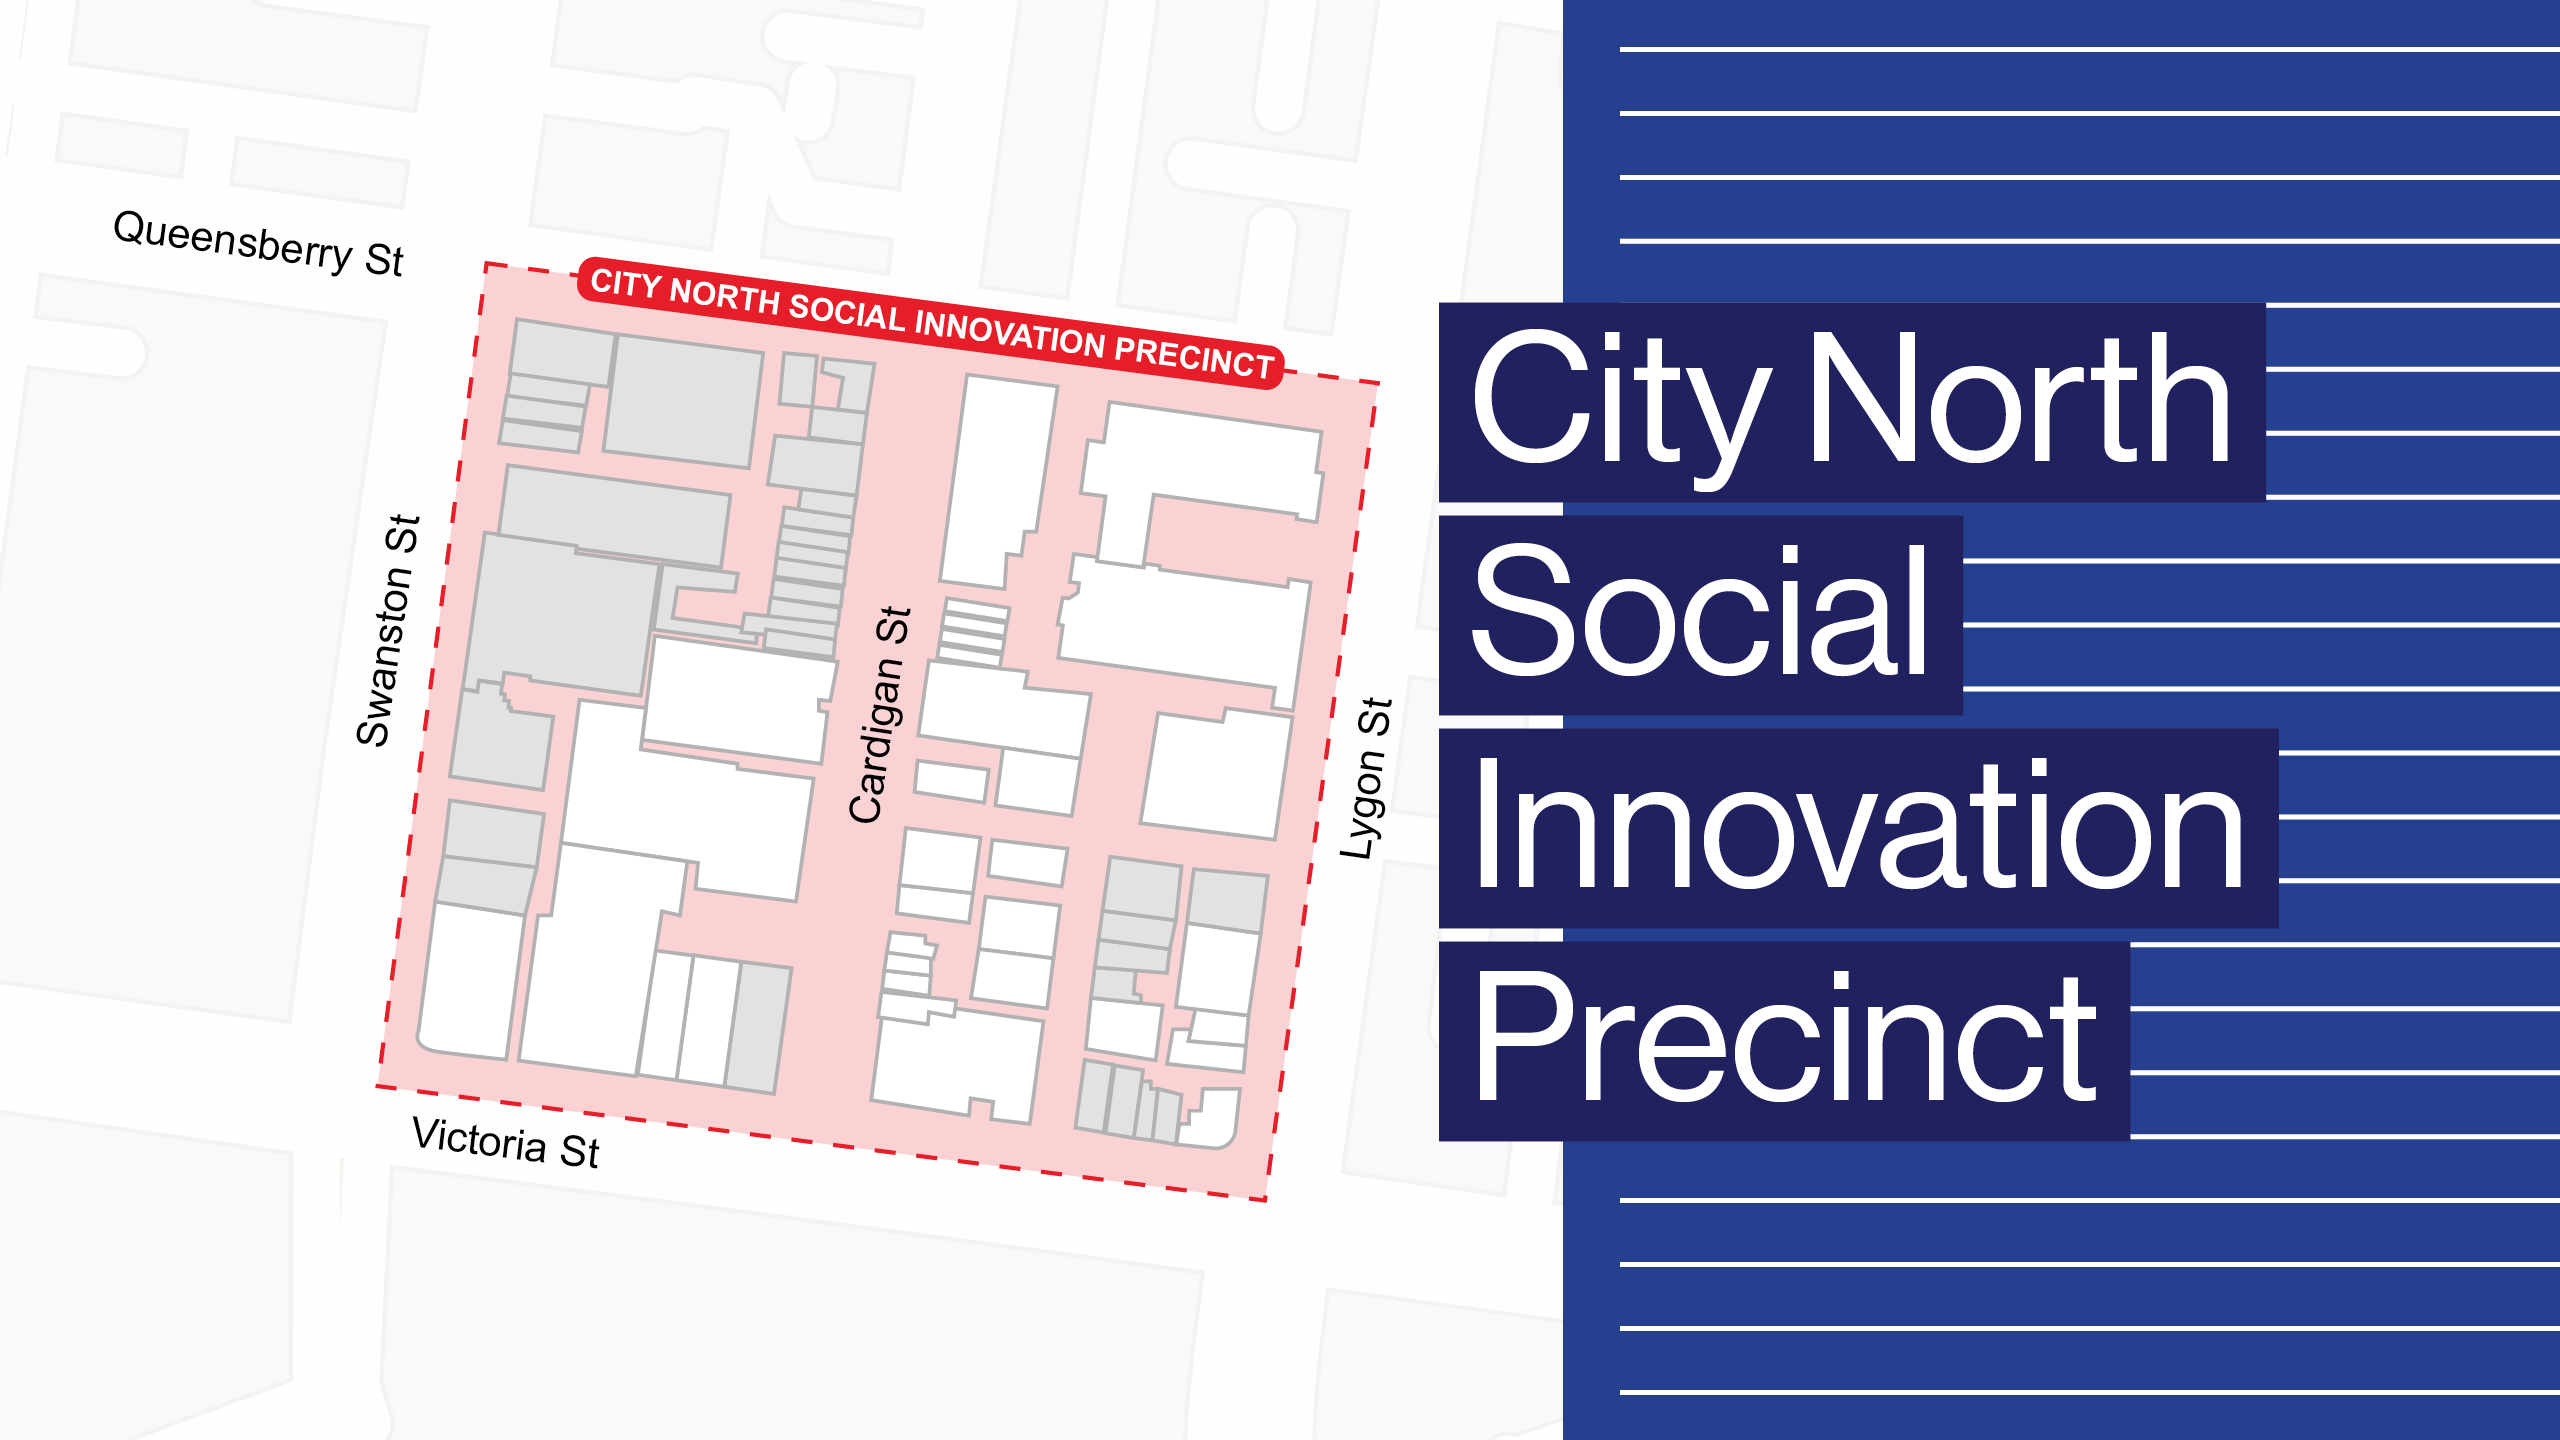 Vector map showing the buildings and surroundings streets included in the City North Social Innovation Precinct.